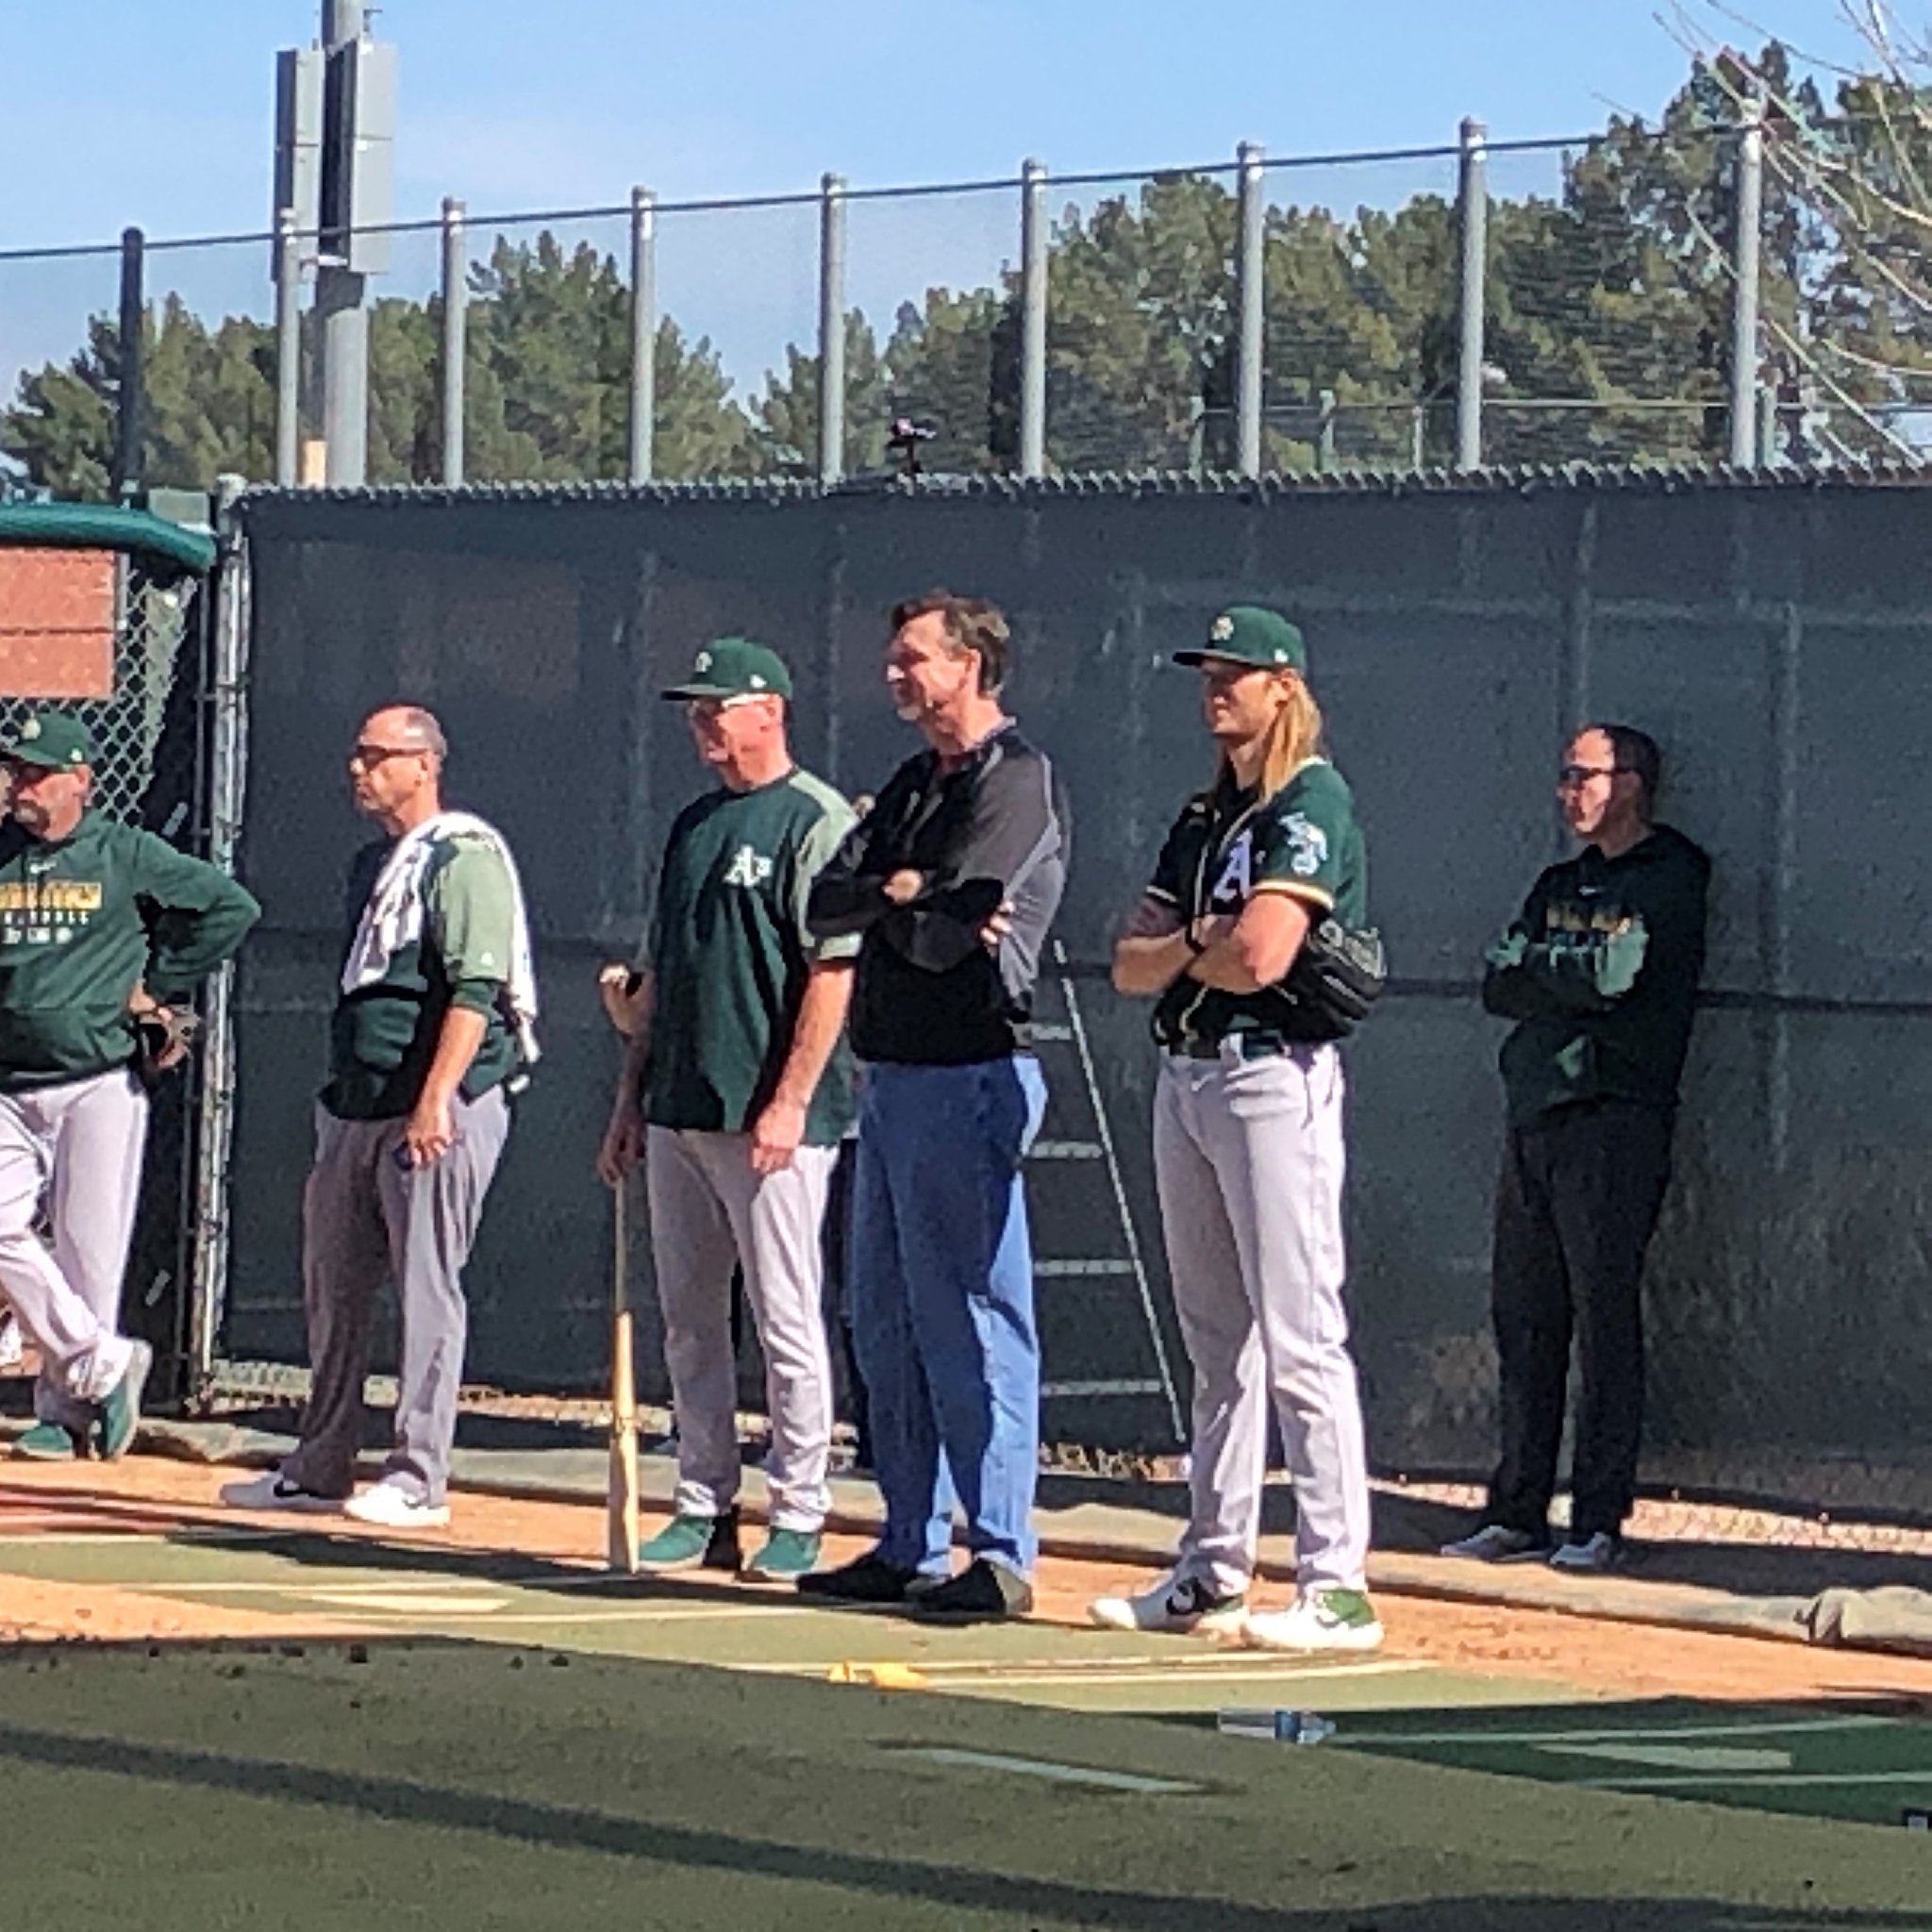 Hall of Famer Randy Johnson chats to A's Manaea, Luzardo and lookalike Puk